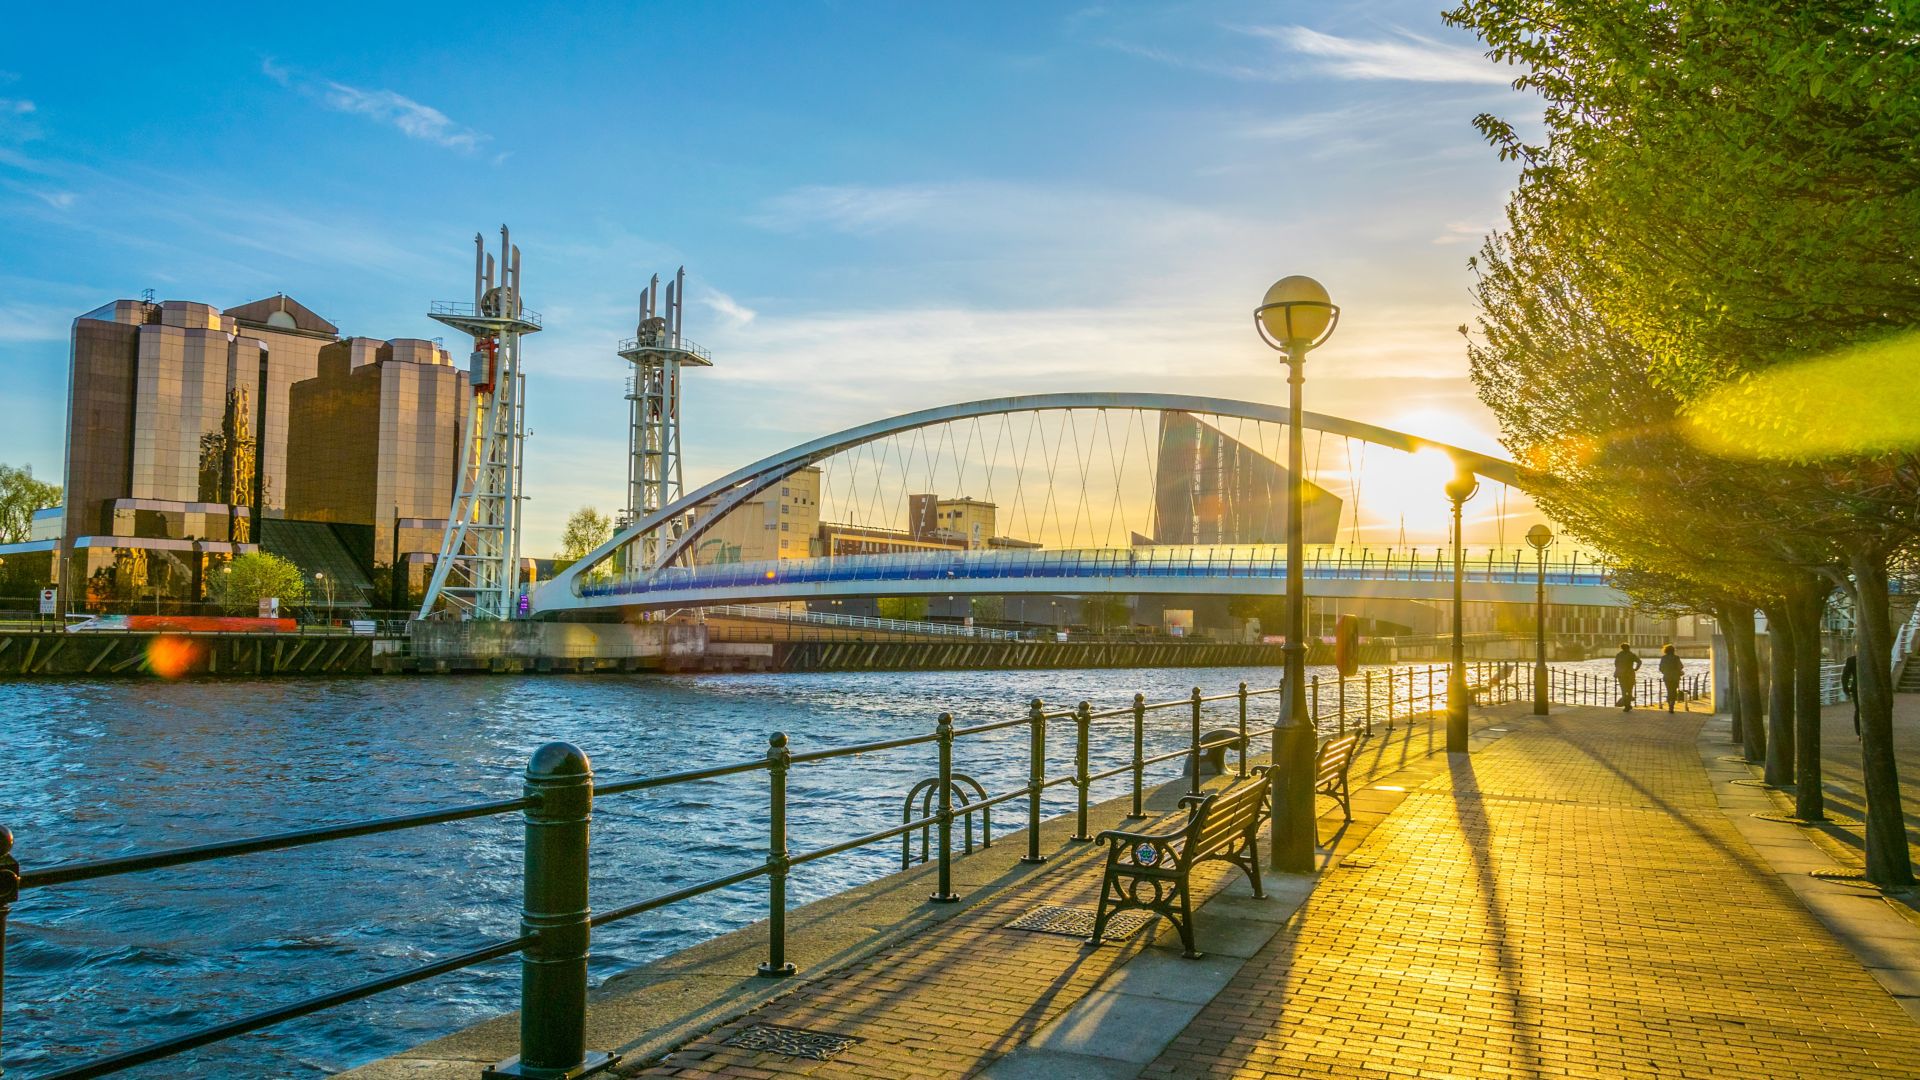 View of a footbridge in Salford quays in Manchester, England
